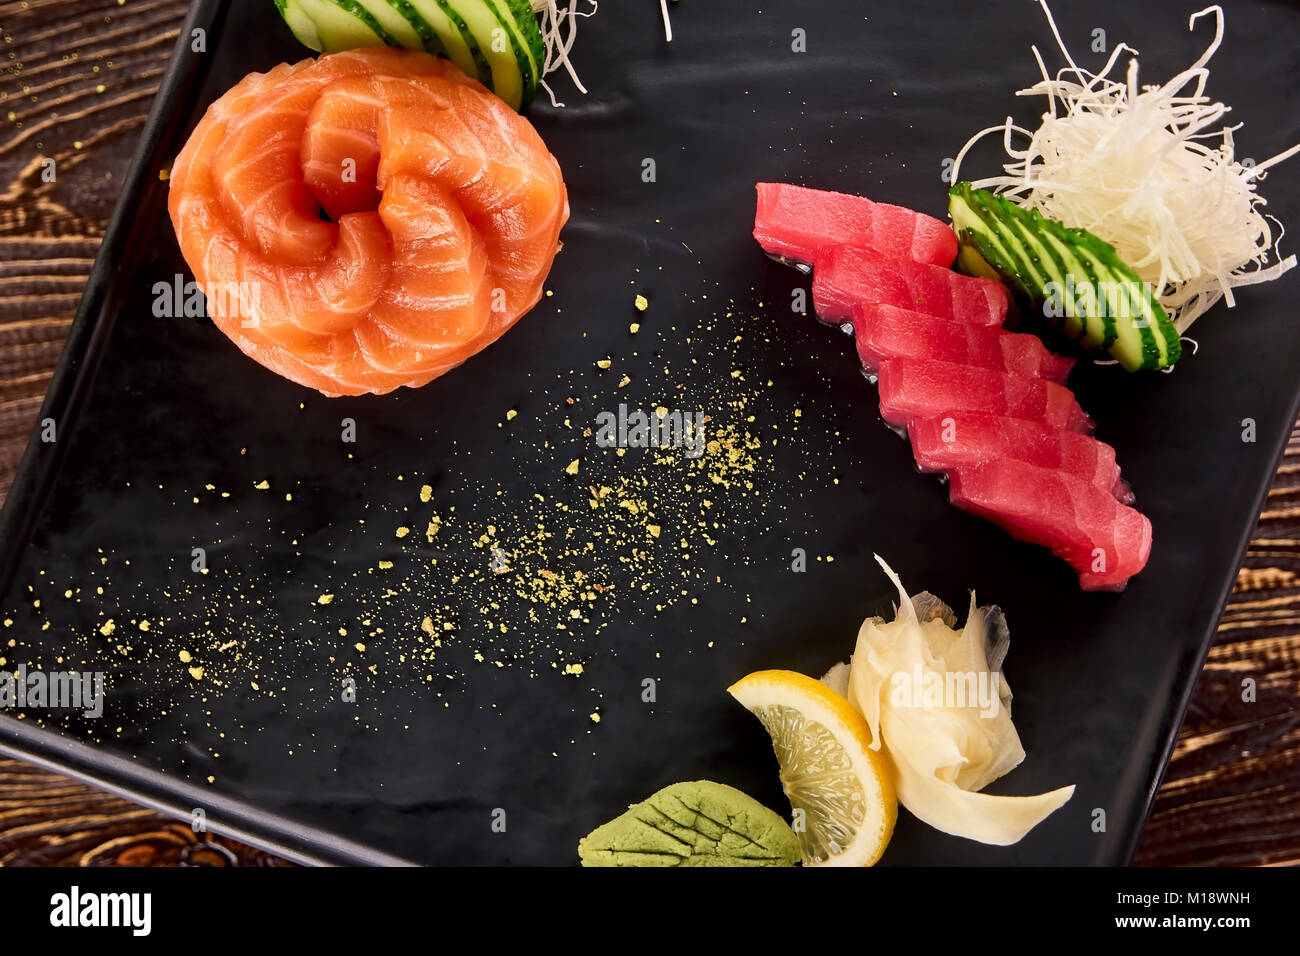 Rolled fresh salmon and tuna sliced pieces closeup. Stock Photo